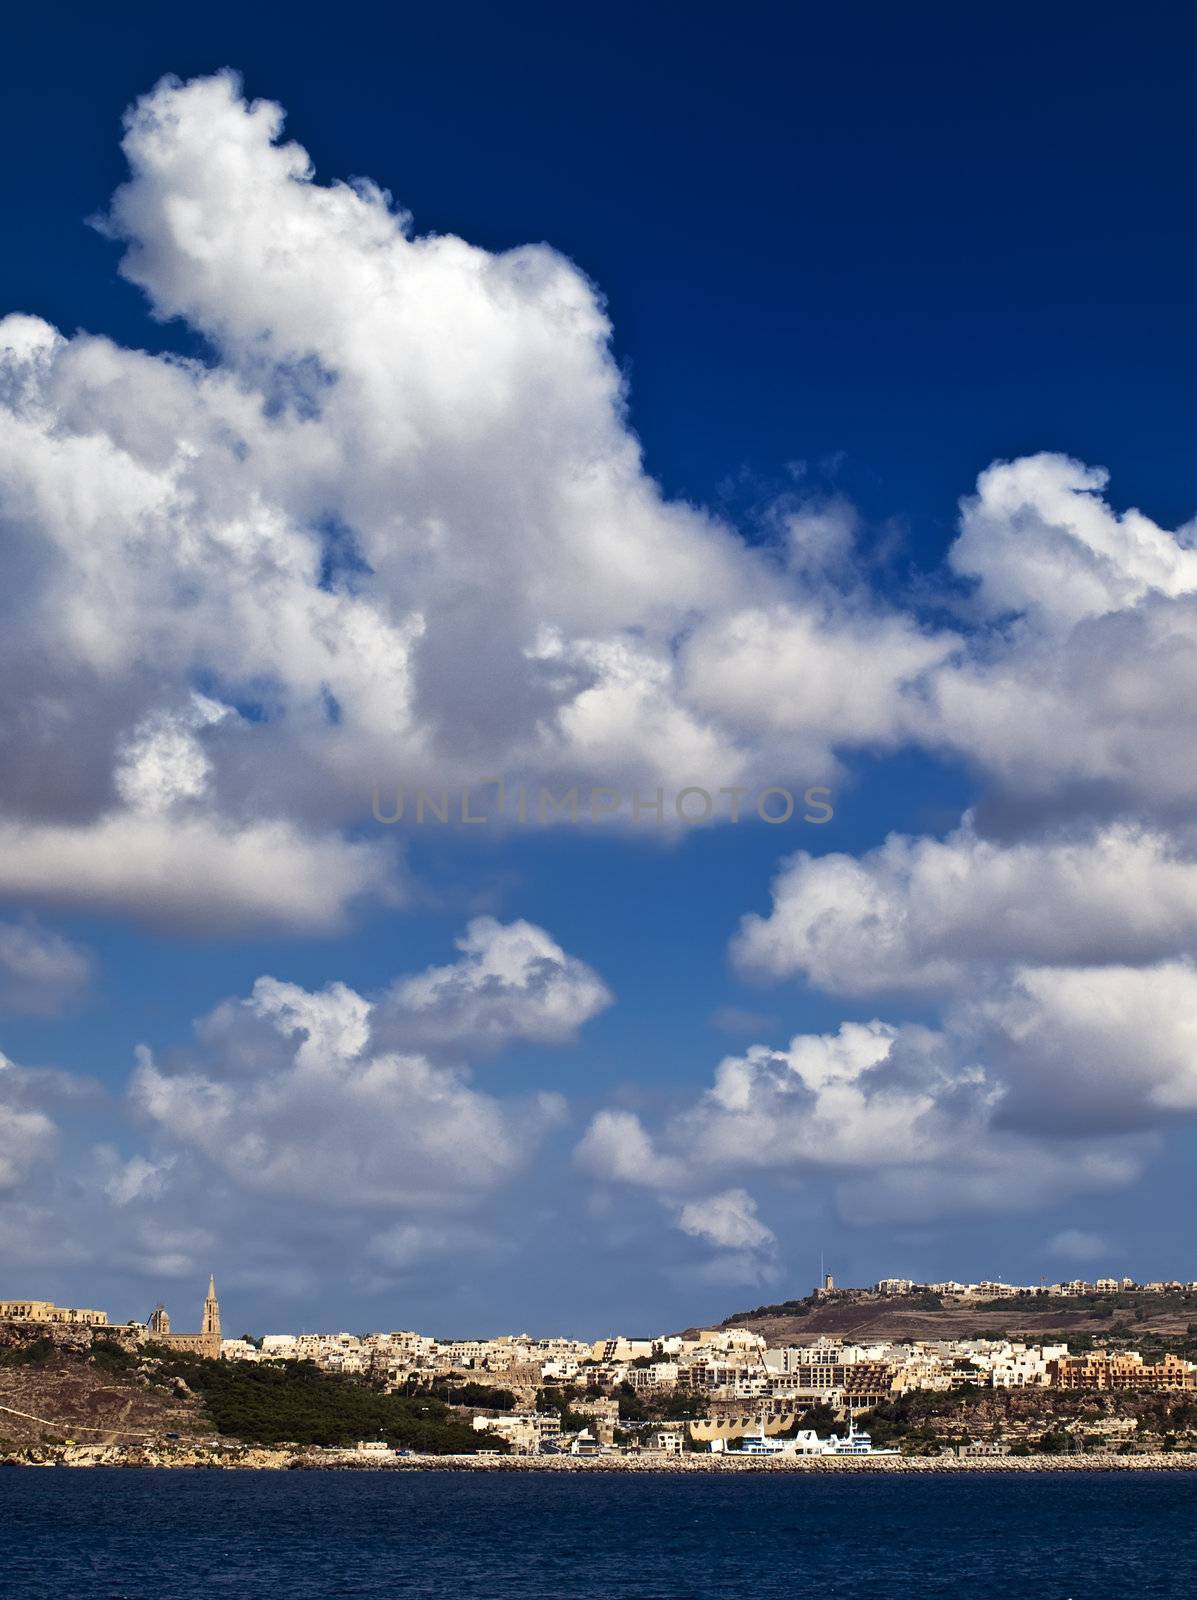 View from outside Mgarr Harbour on the approach to Gozo by ferry